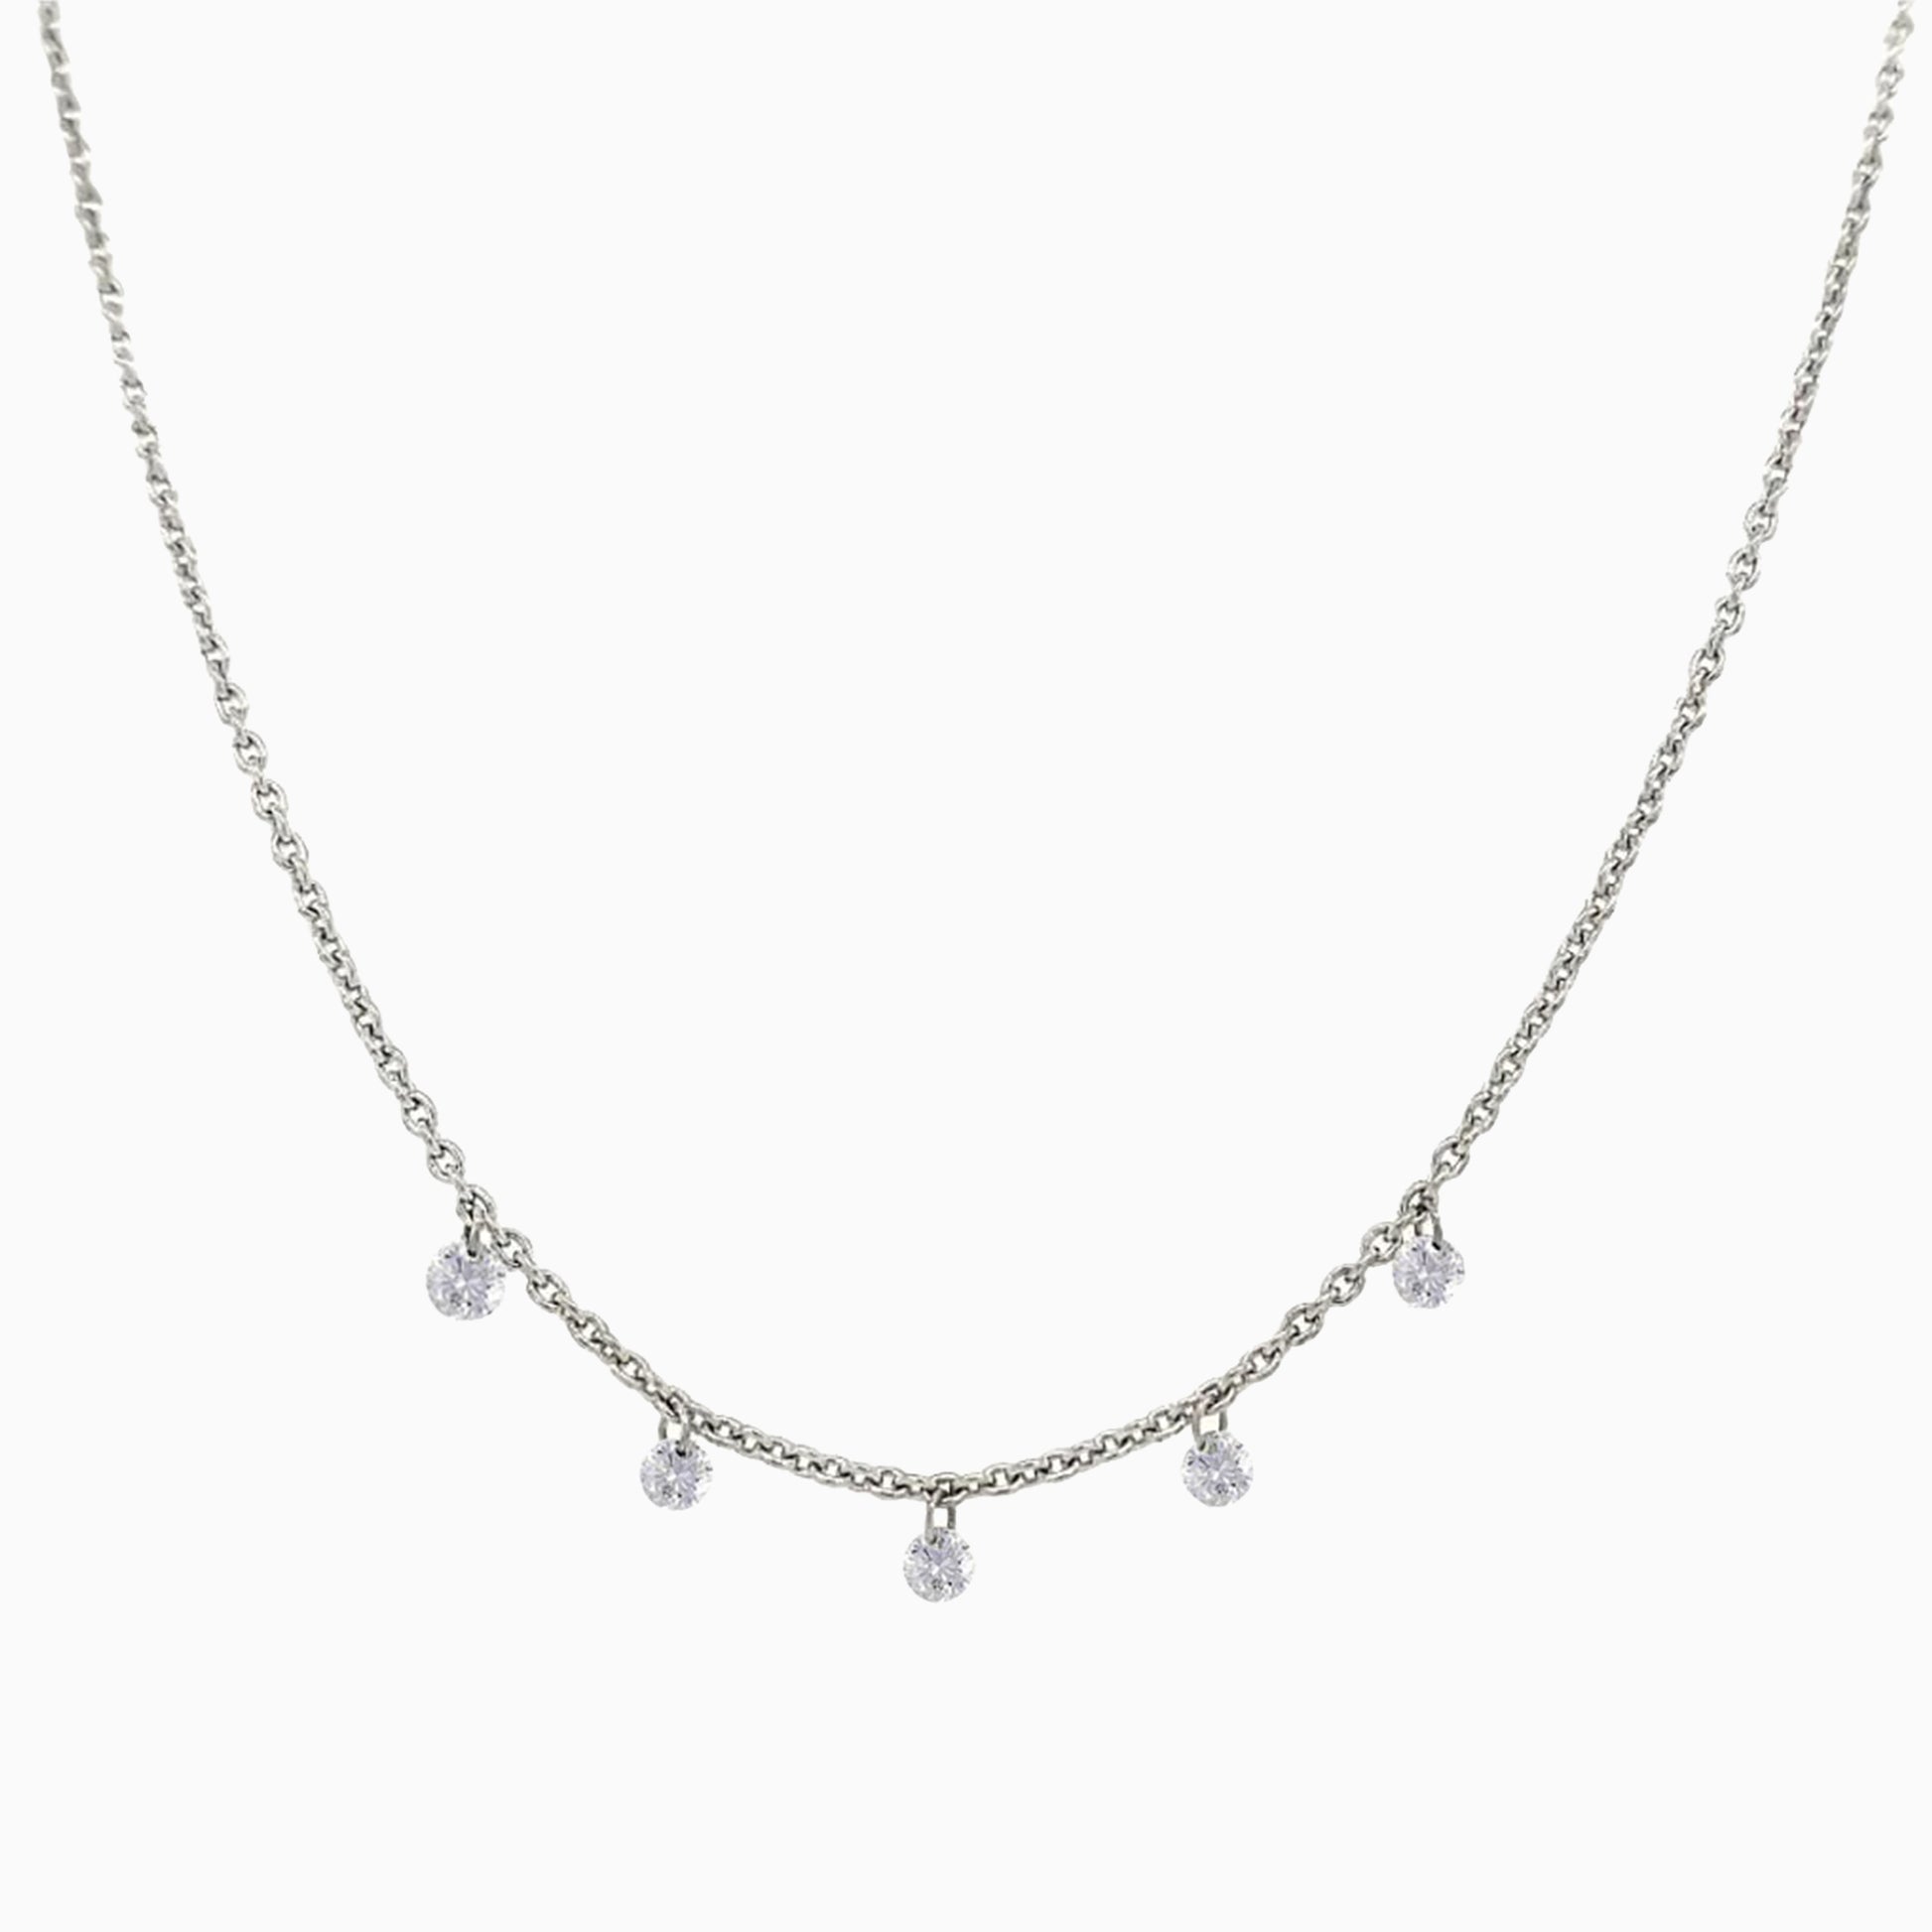  Floating Five Diamond Necklace in White Gold on a white background